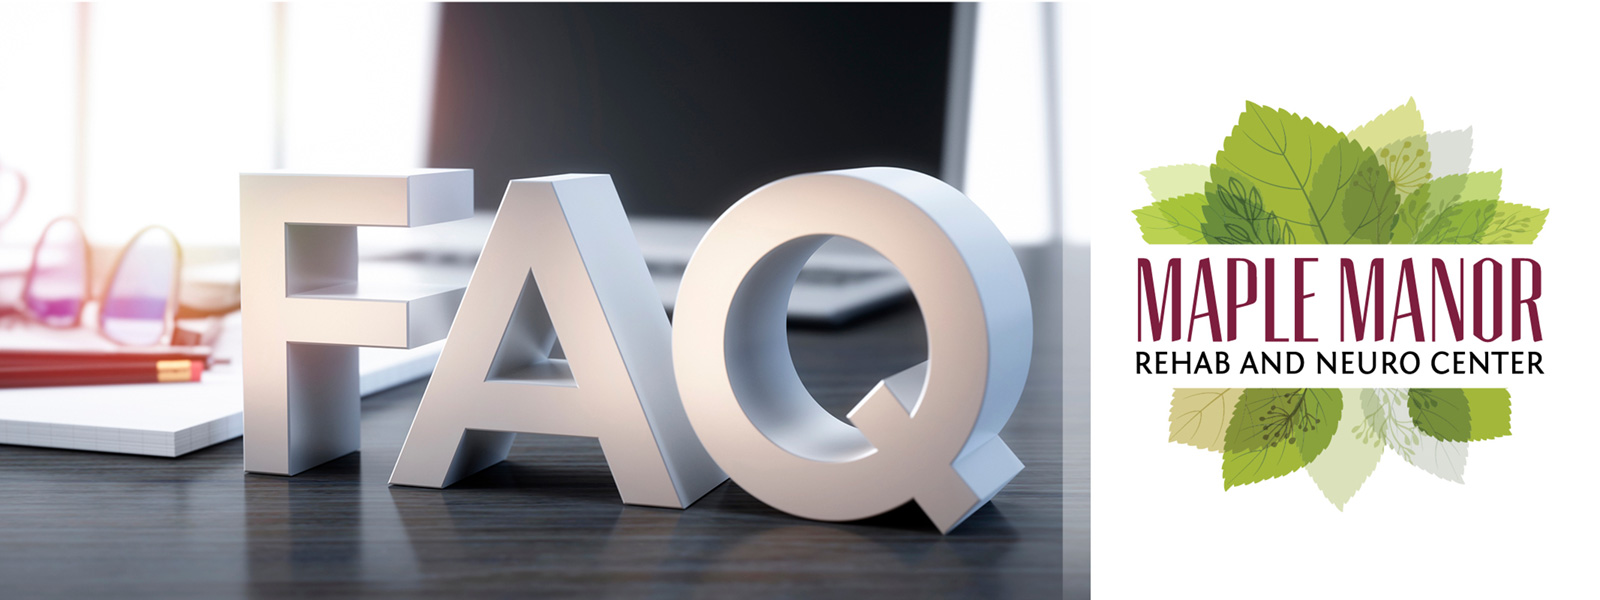 frequently asked questions banner ad